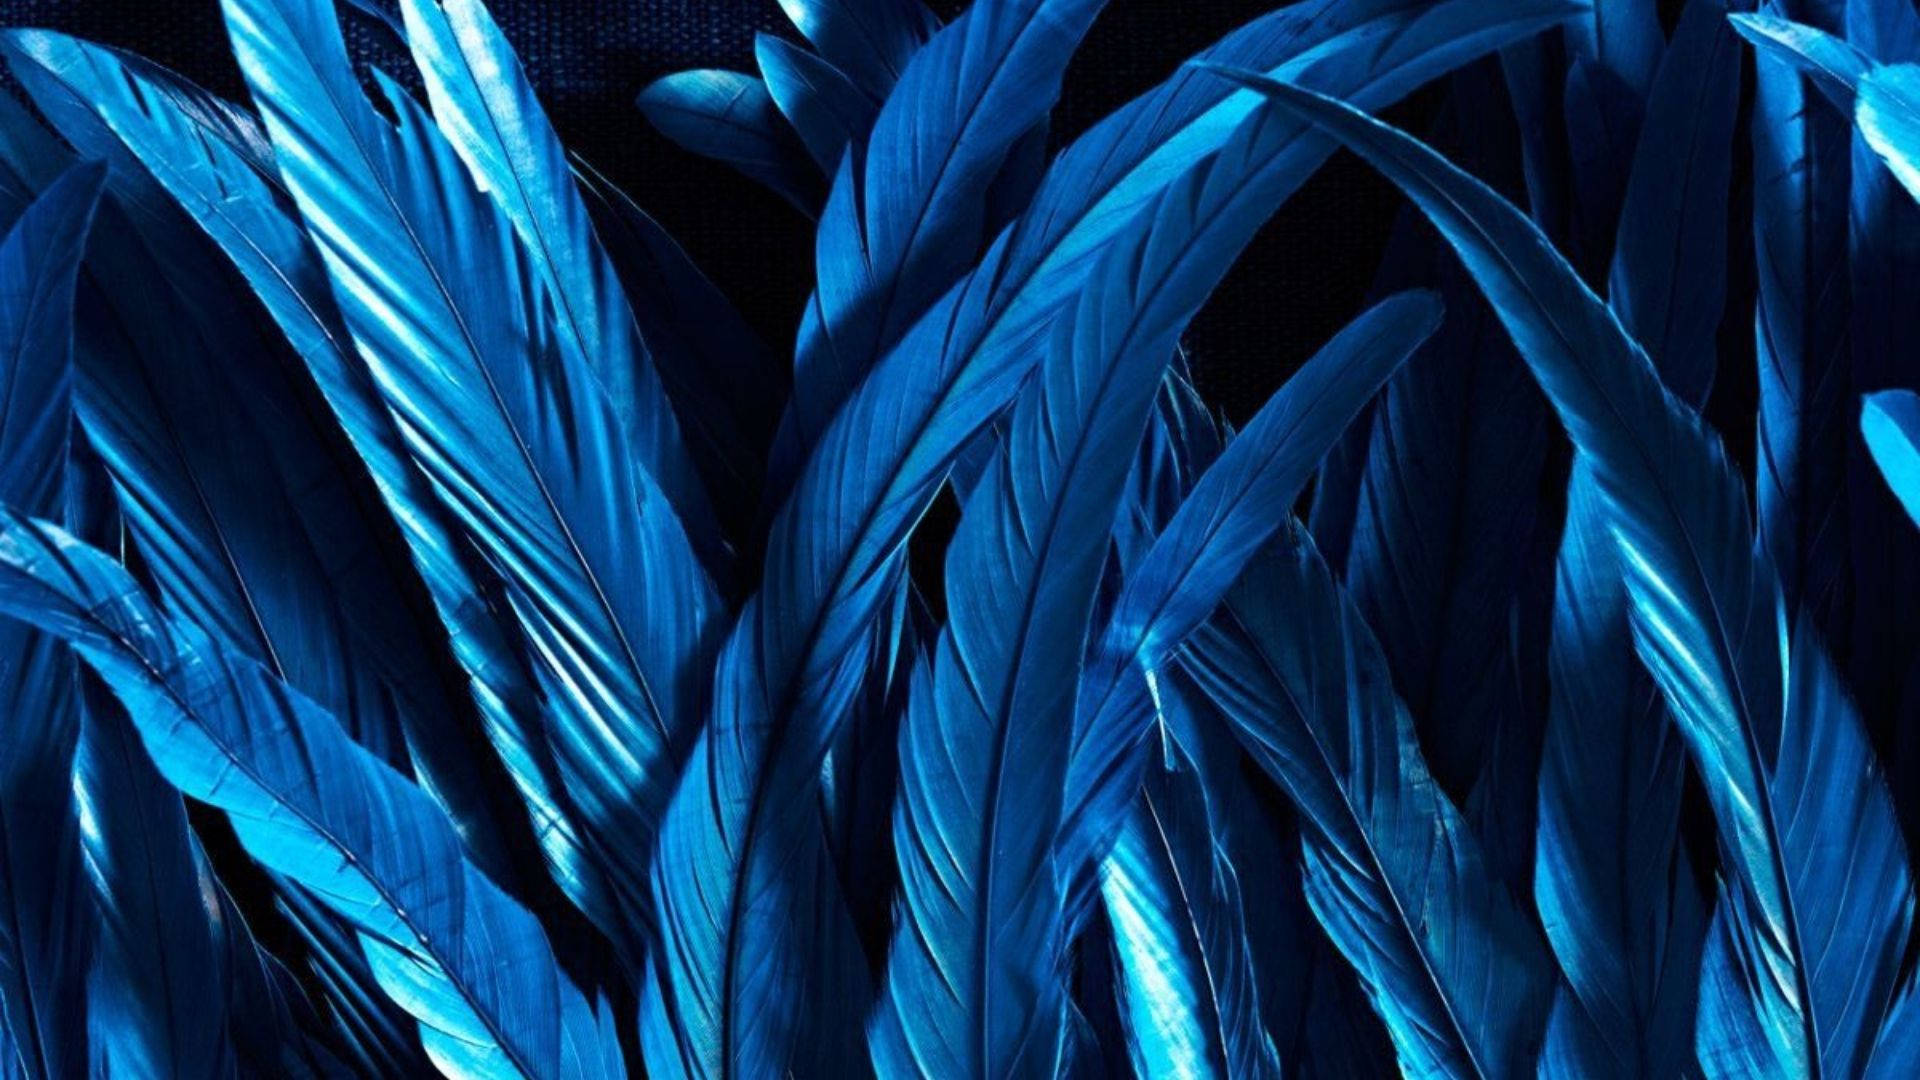 Neon Blue Feathers